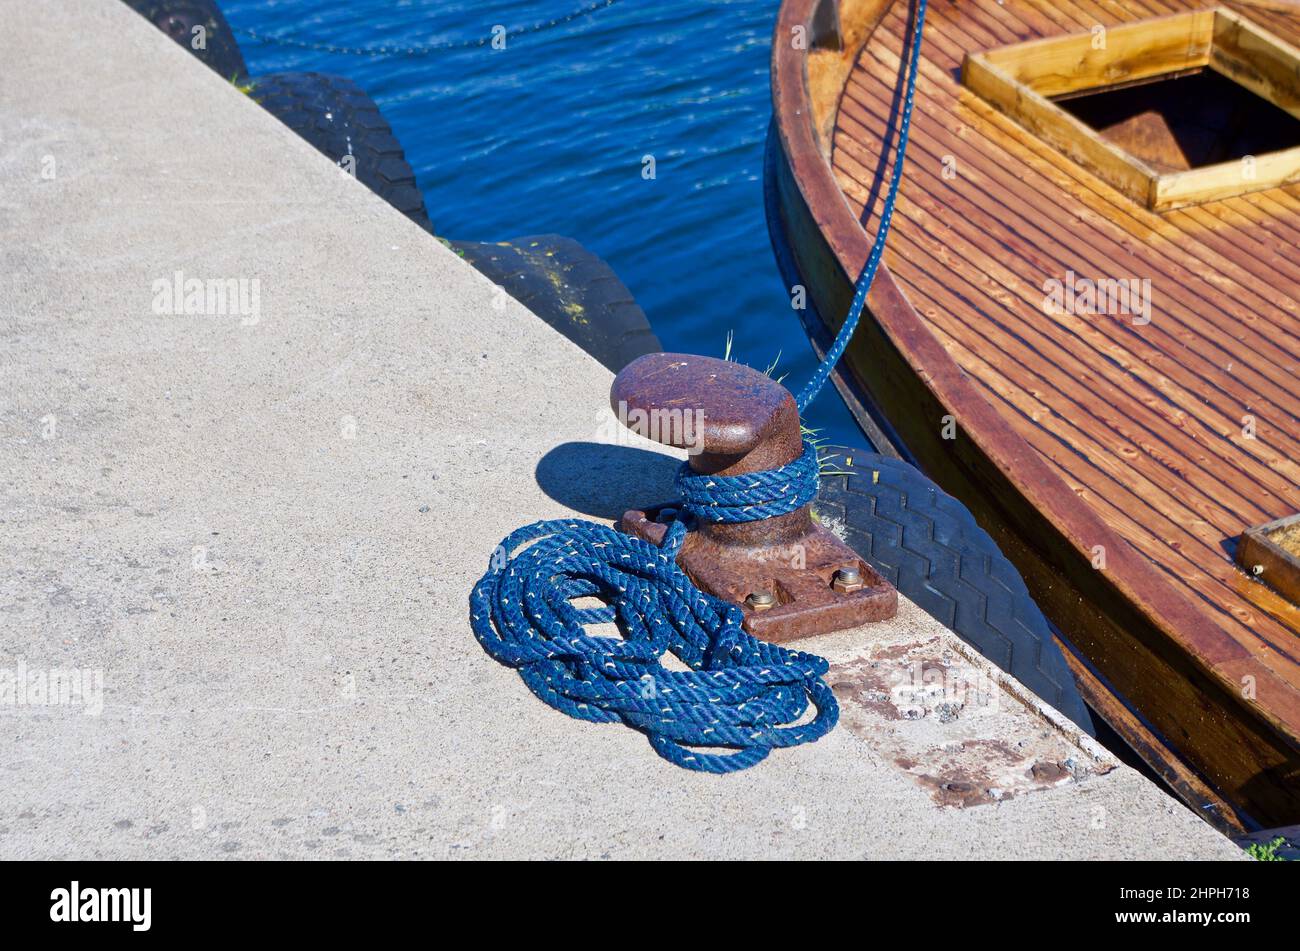 Wooden sailboat that is moored at a quay. Stock Photo